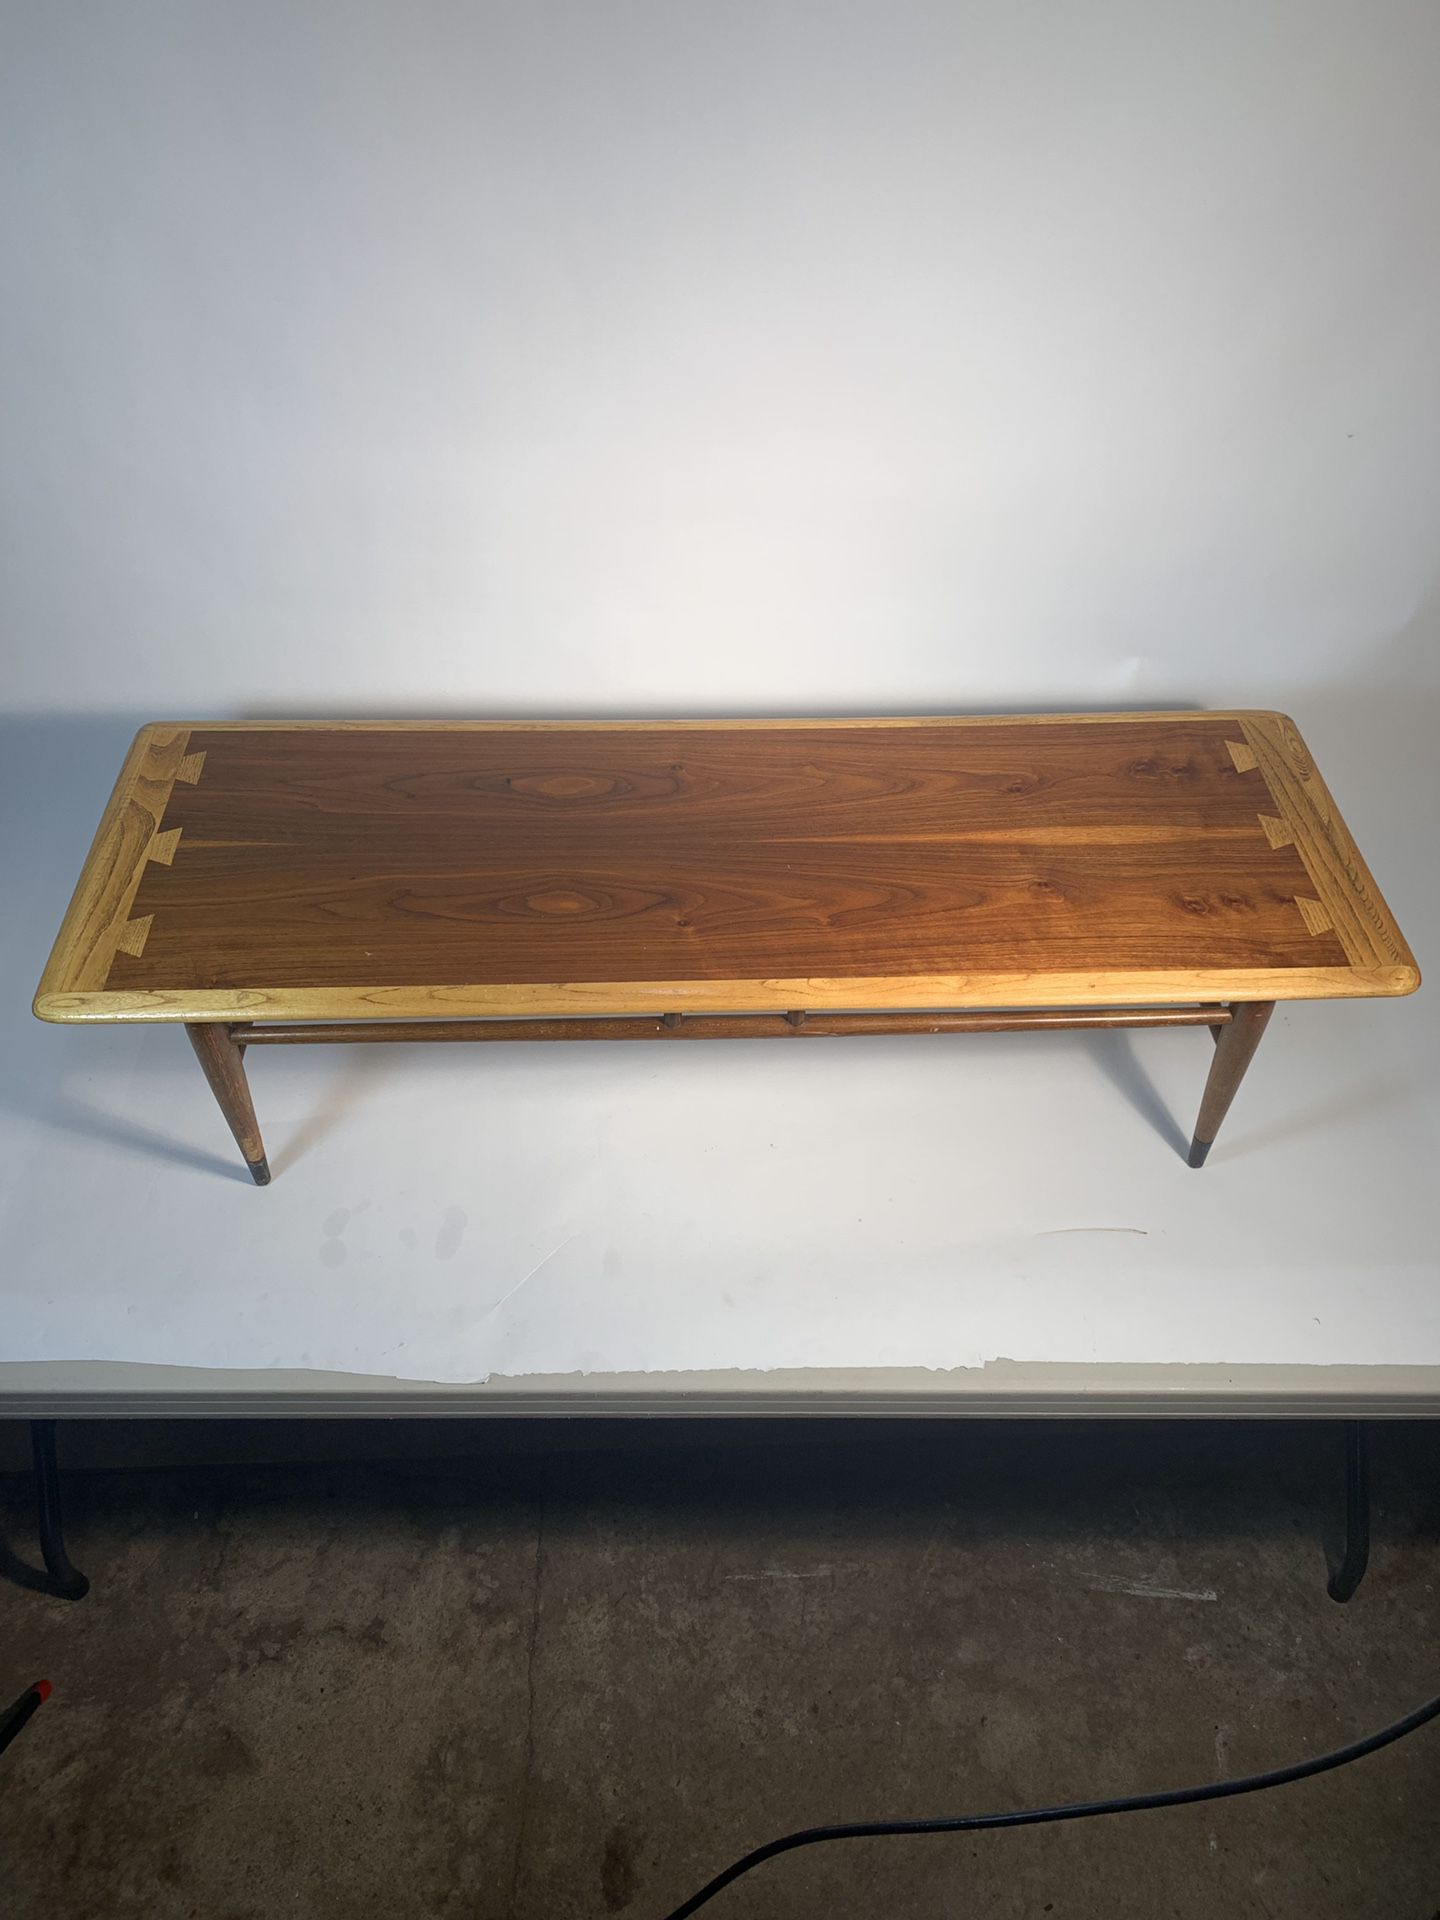 Lane acclaim surfboard style table 56”